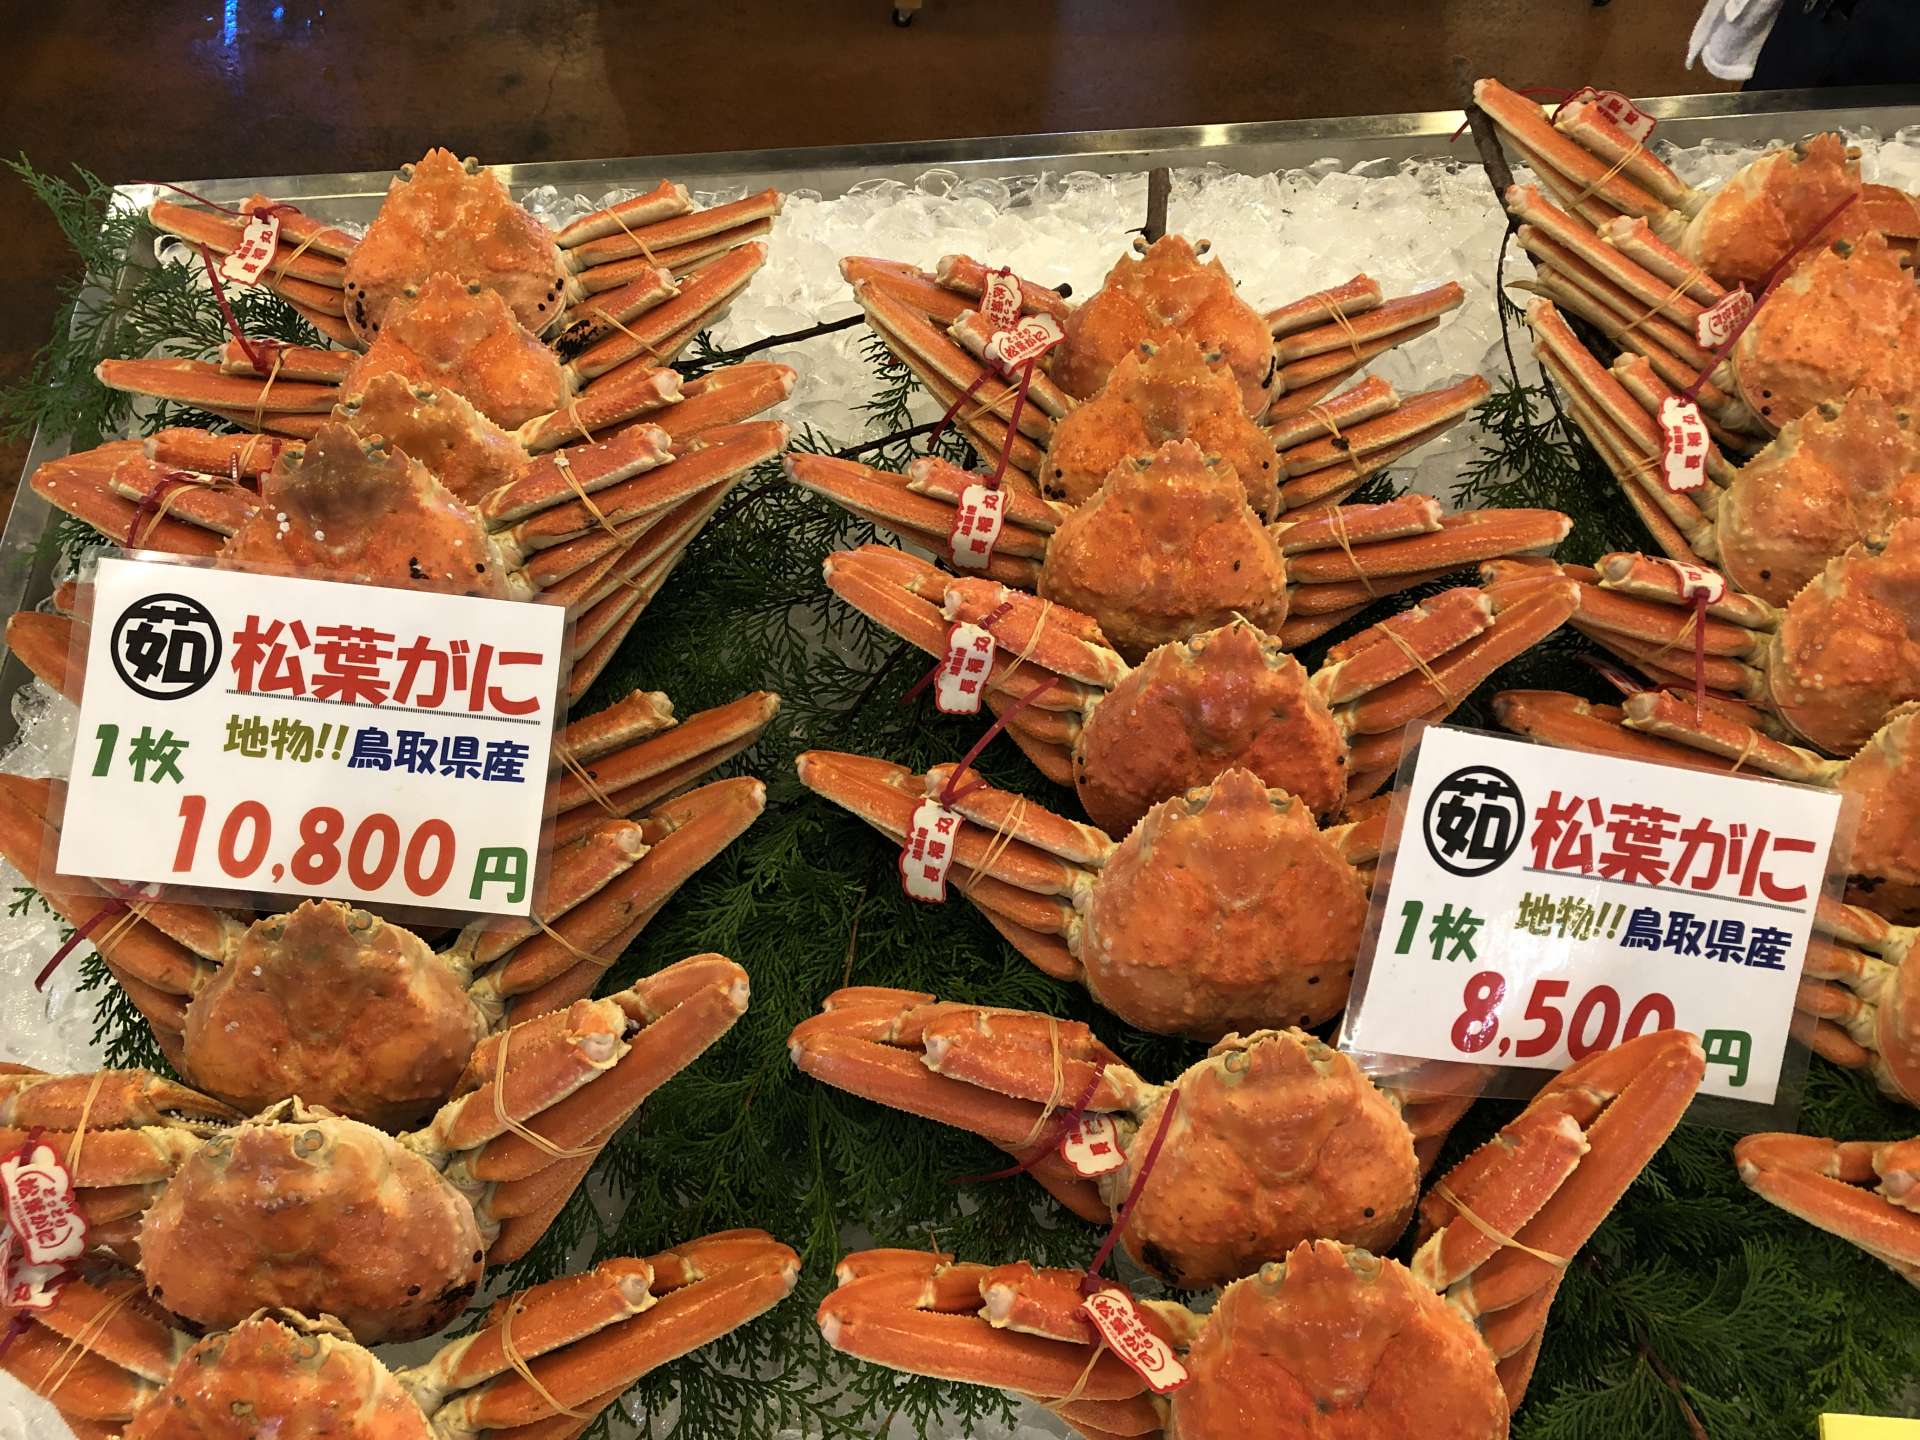 During the Matsuba Crab season between November and March, shoppers come from afar.